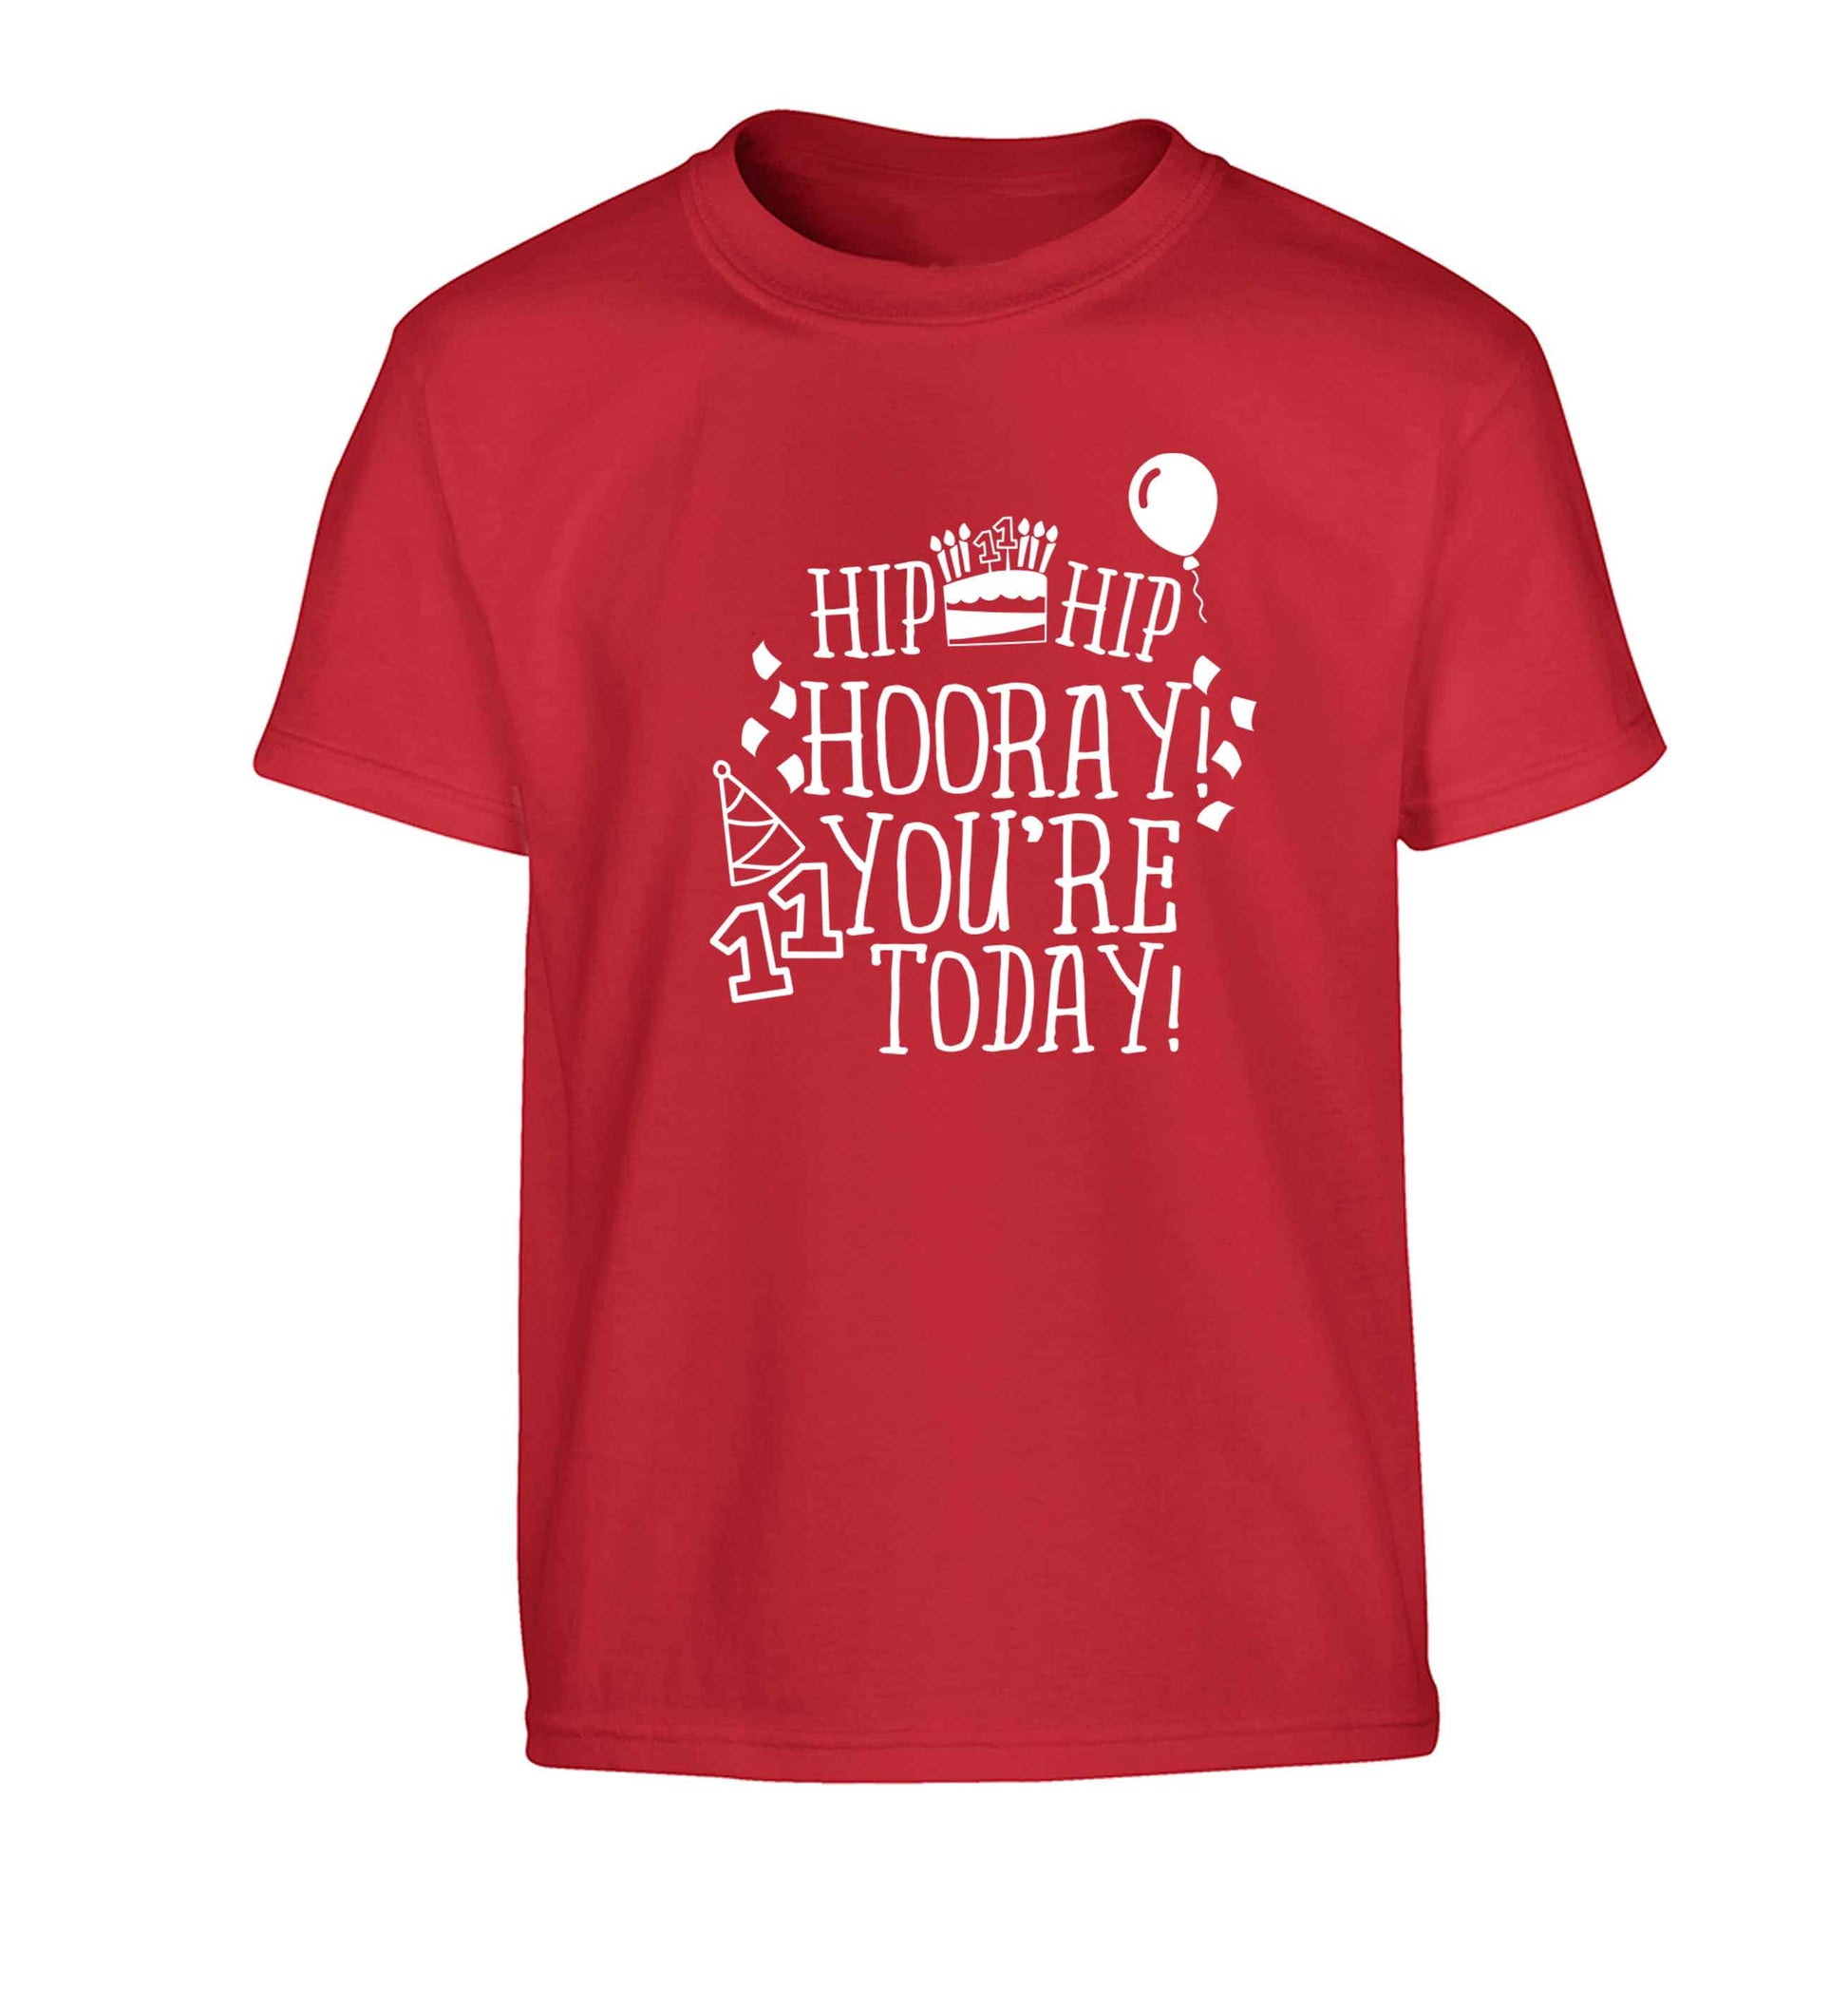 Hip hip hooray I you're eleven today! Children's red Tshirt 12-13 Years